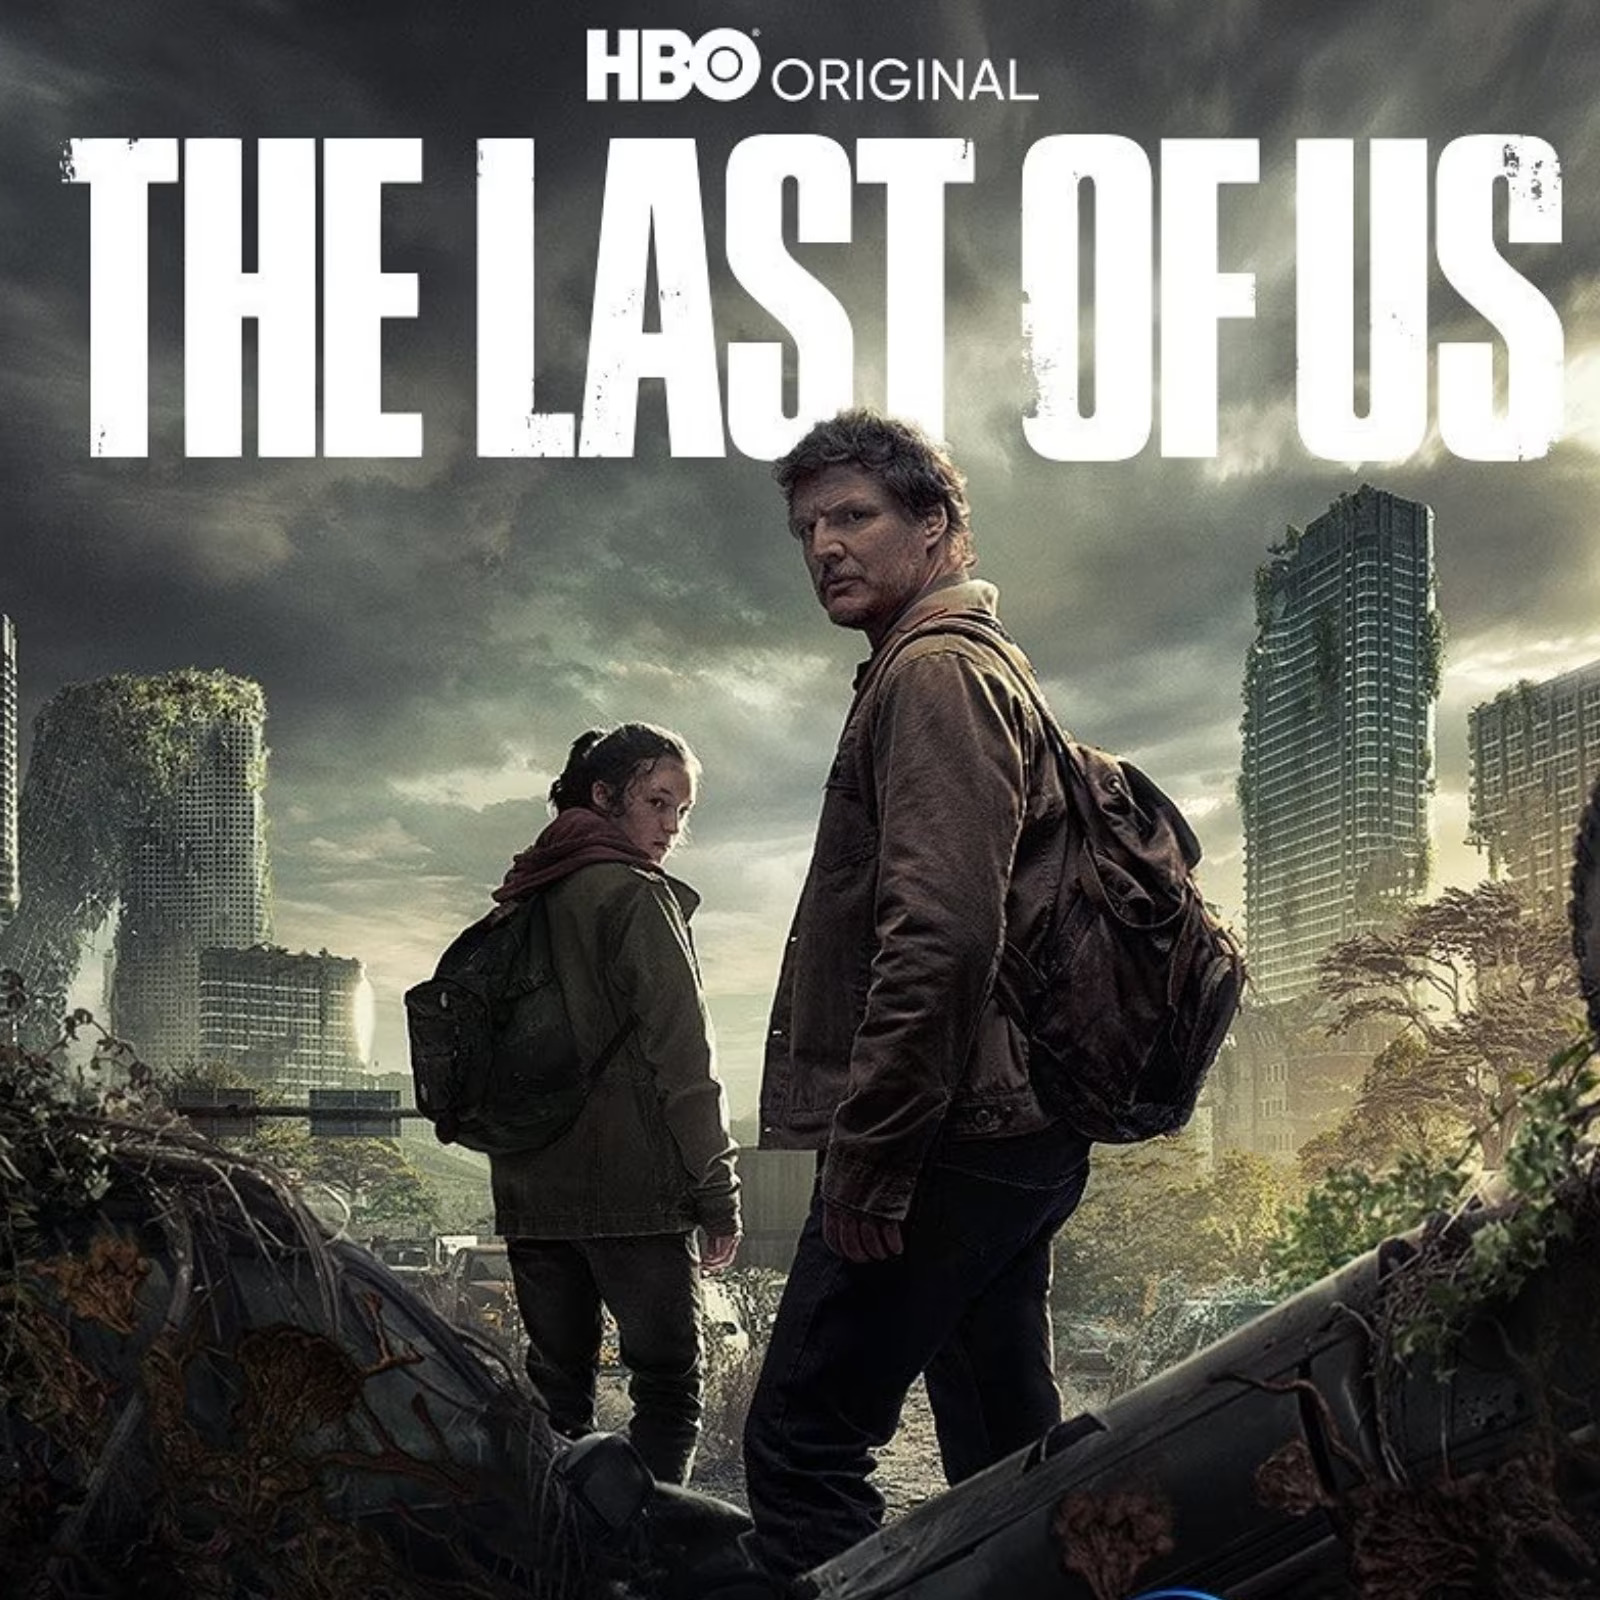 How many episodes of The Last of Us are there?